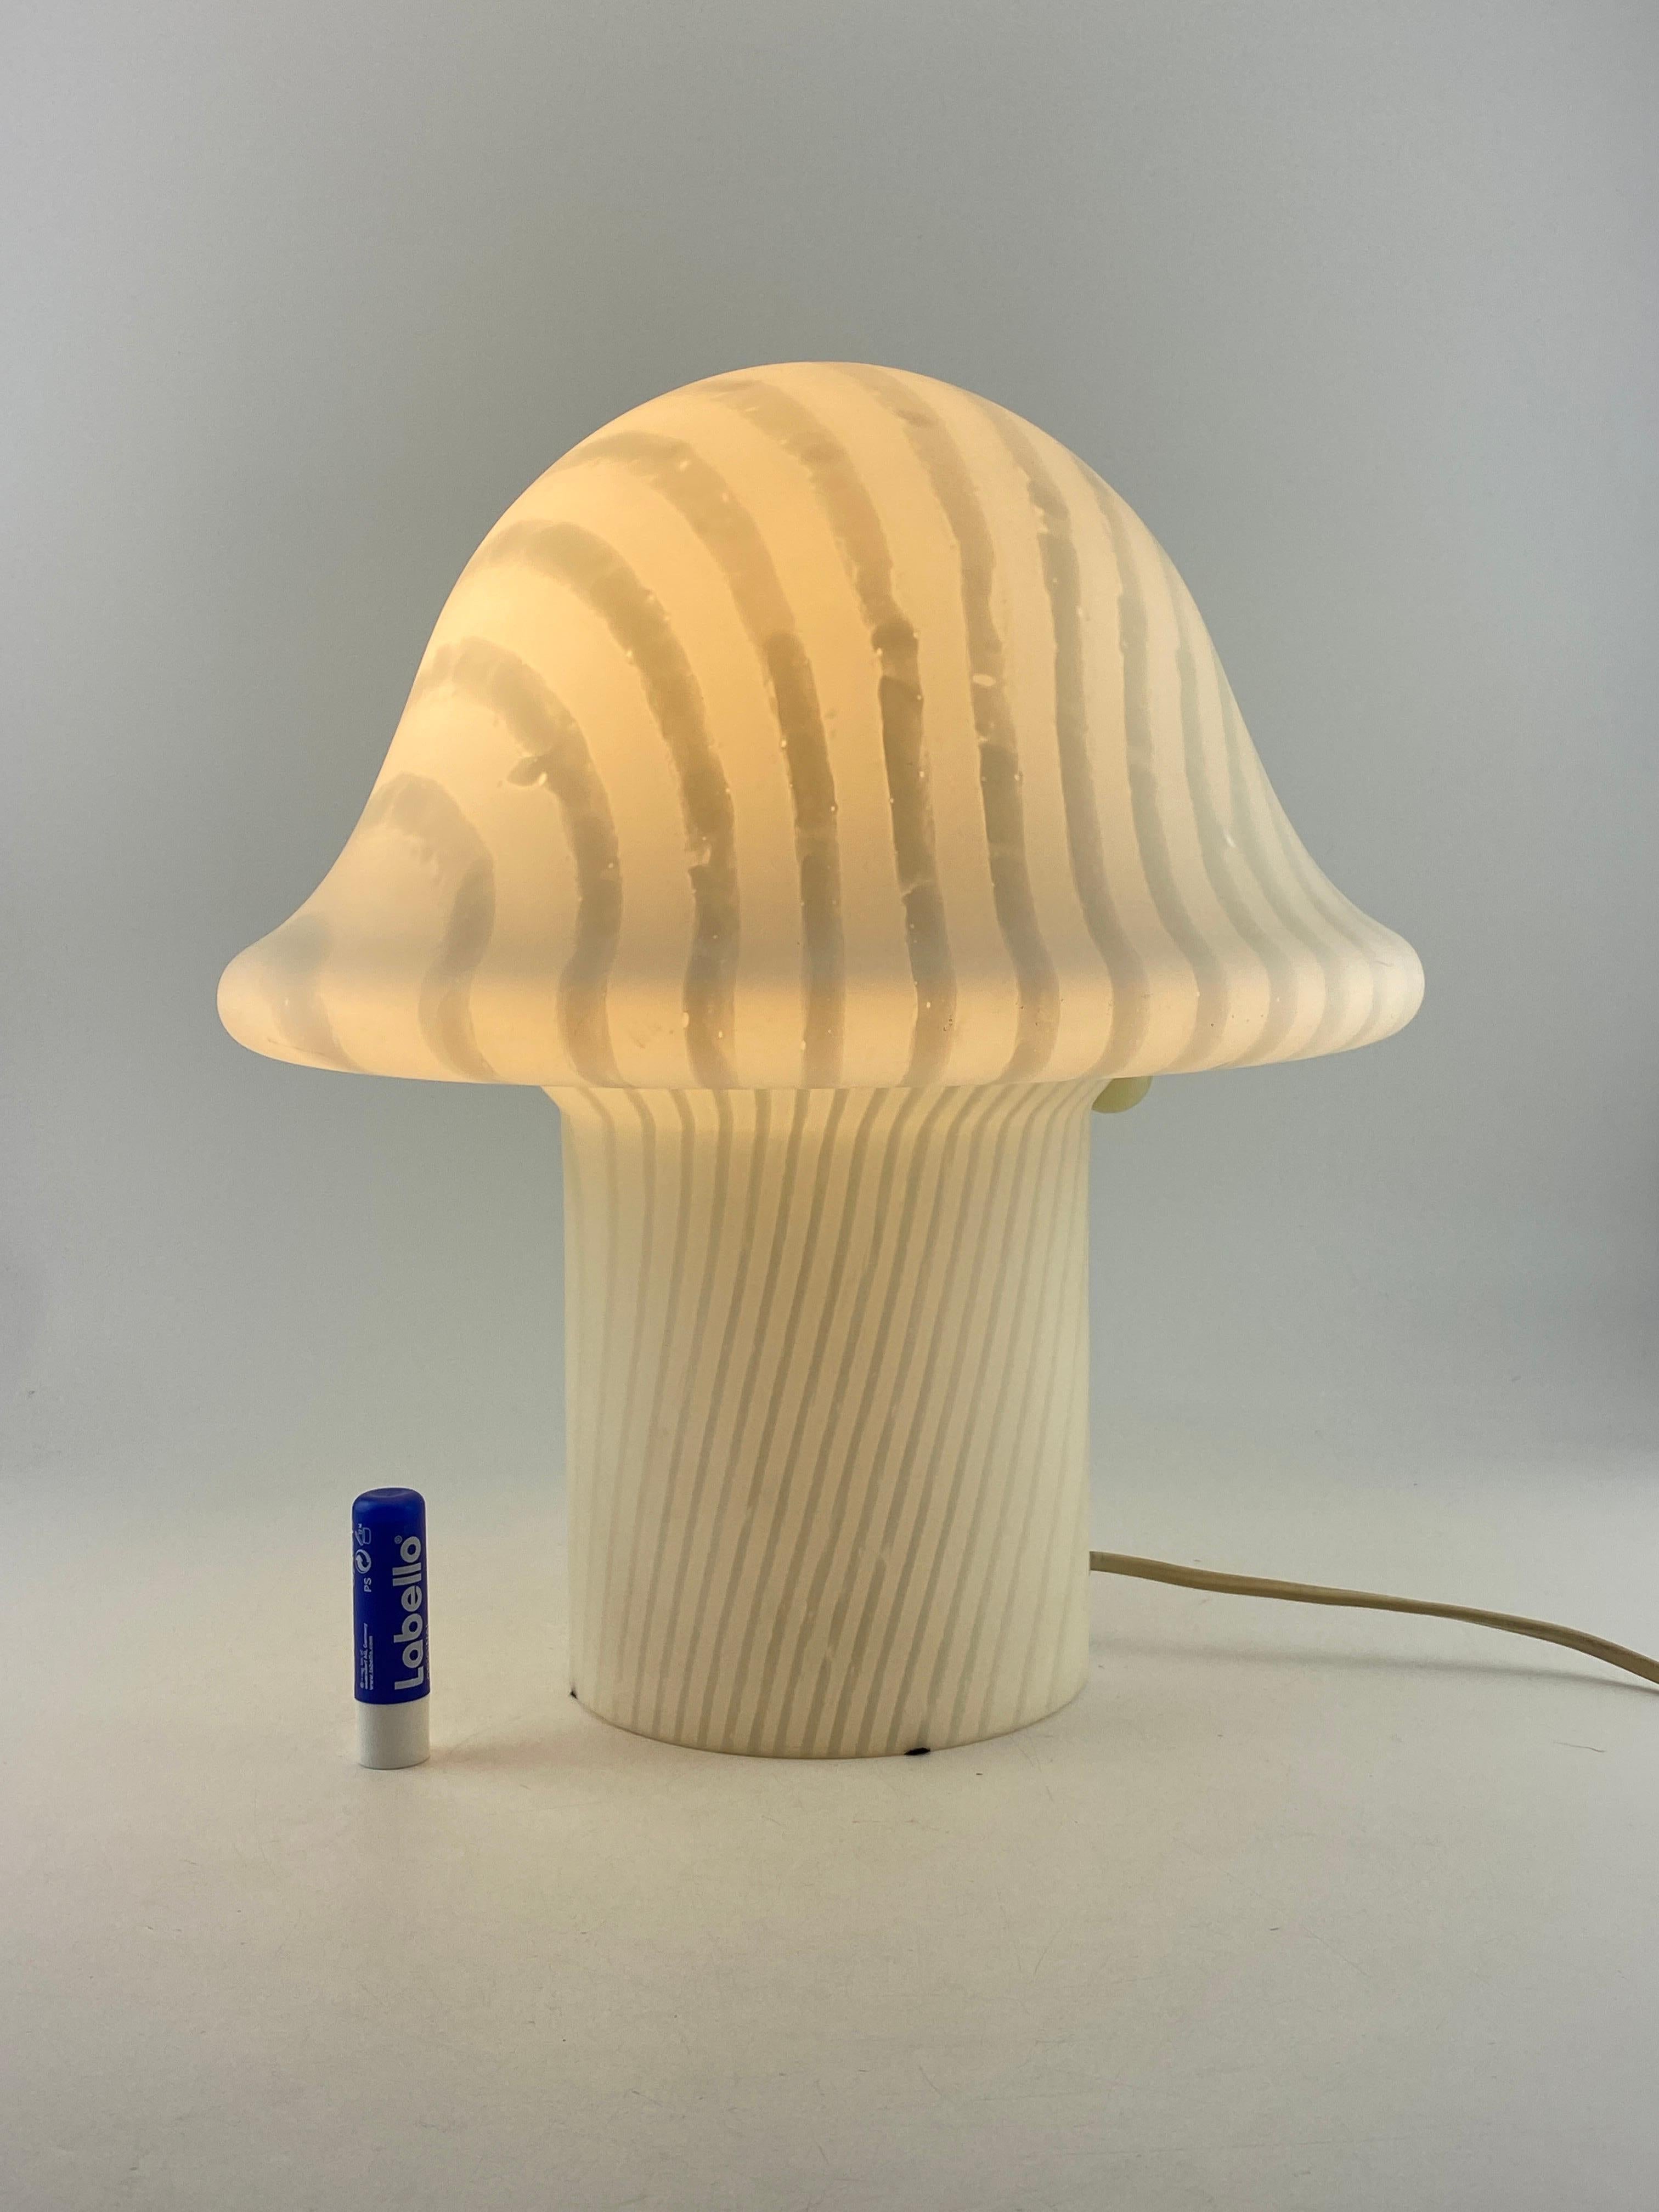 Beautiful German design by Peill and Putzler, produced around 1970 - 1980.

This lamp is made of one mouth-blown piece of crystal glass with a striped print and it's shaped like a typical mid-century mushroom. The lamp is placed directly on the